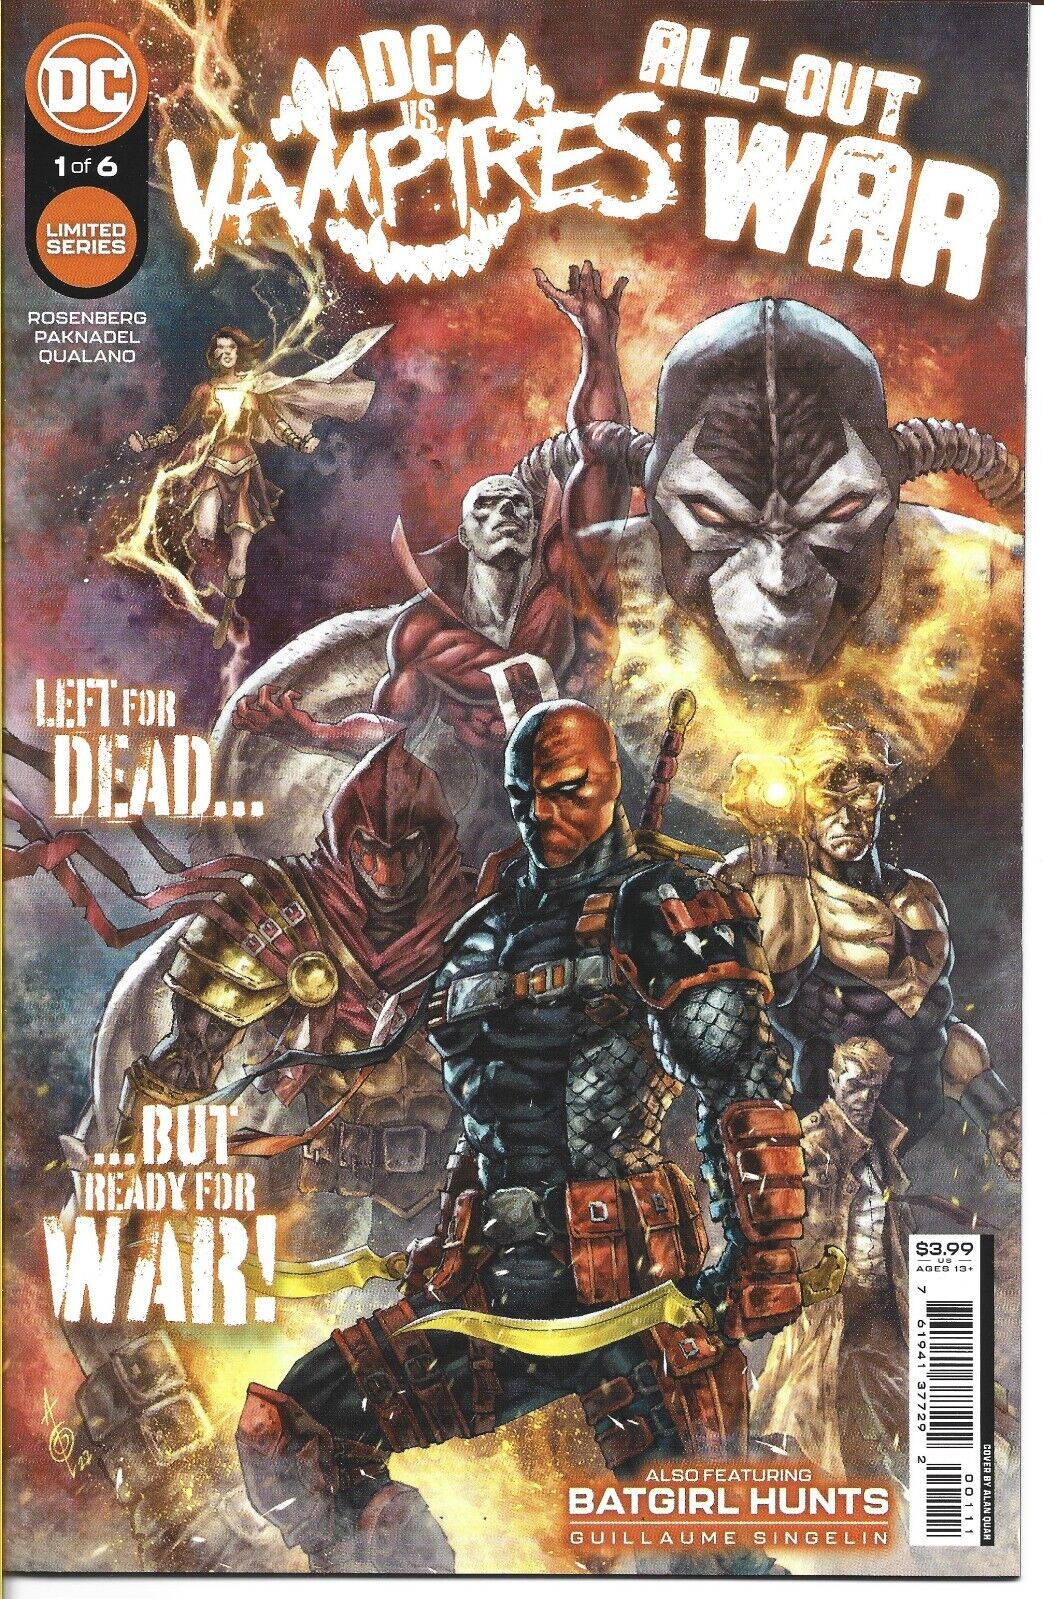 DC VS VAMPIRES ALL OUT WAR #1 DC COMICS 2022 NEW UNREAD BAGGED AND BOARDED